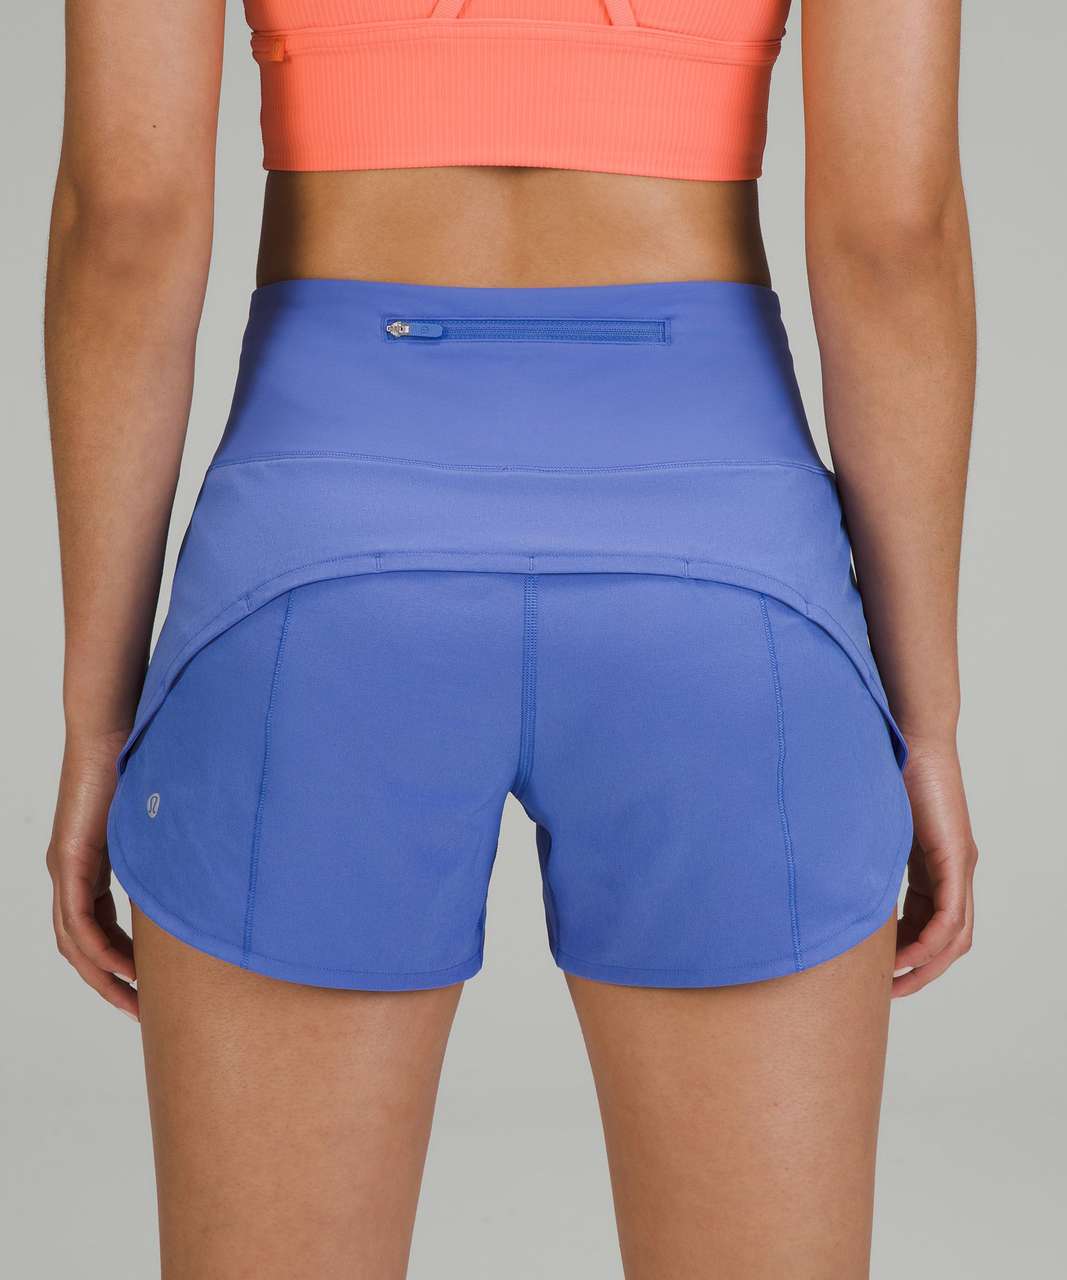 NEW Women Lululemon Speed Up High-Rise Lined Short 4 Blue Chill Size 8 &  10